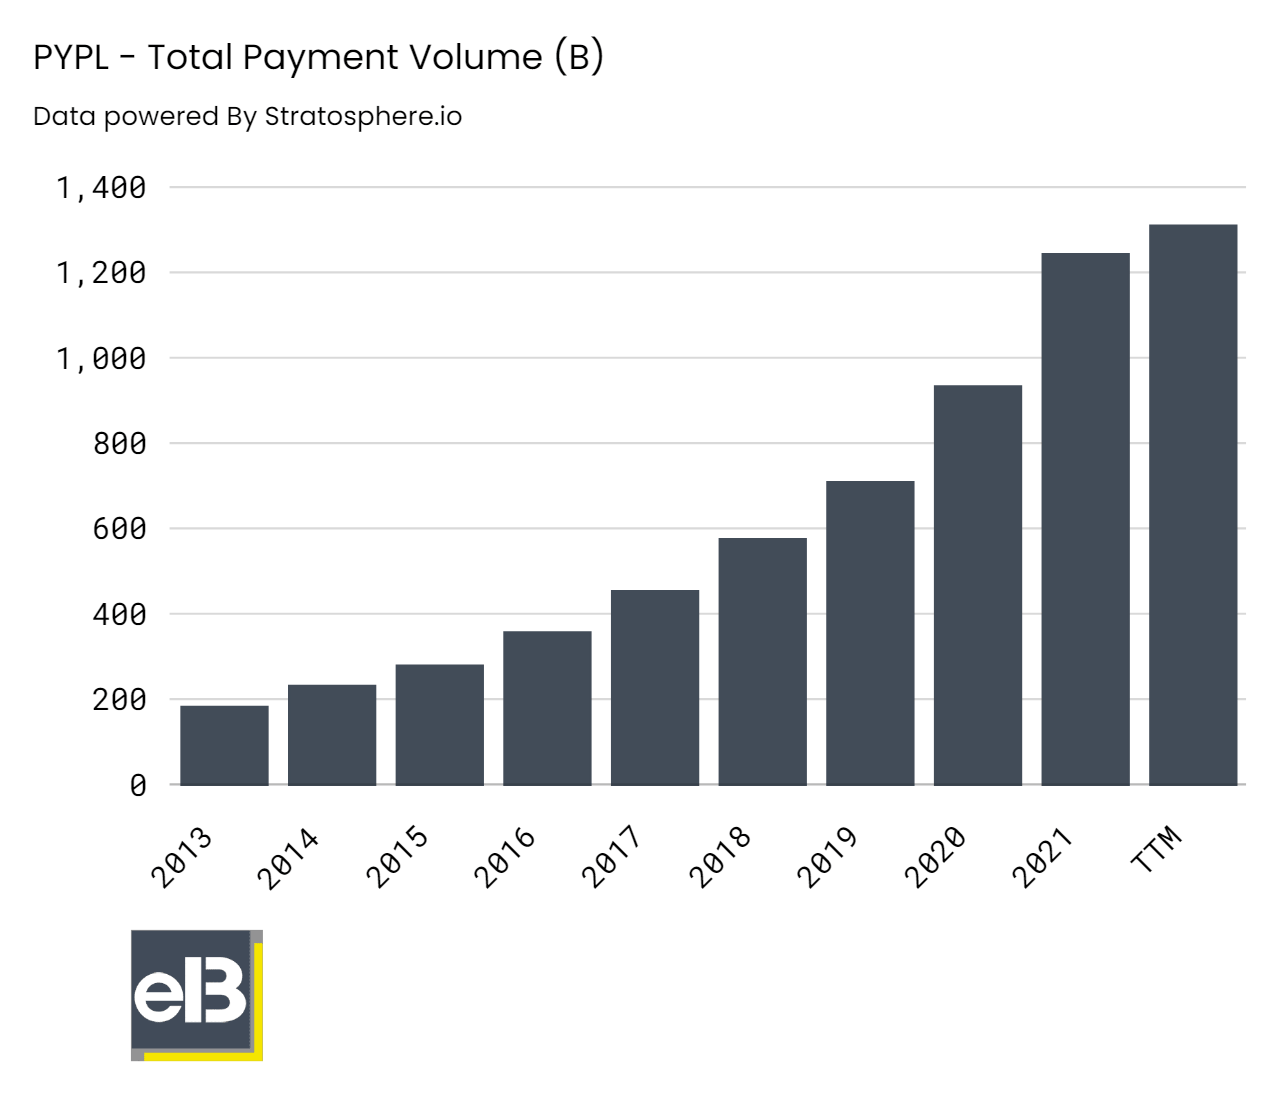 Paypal total payment volume chart